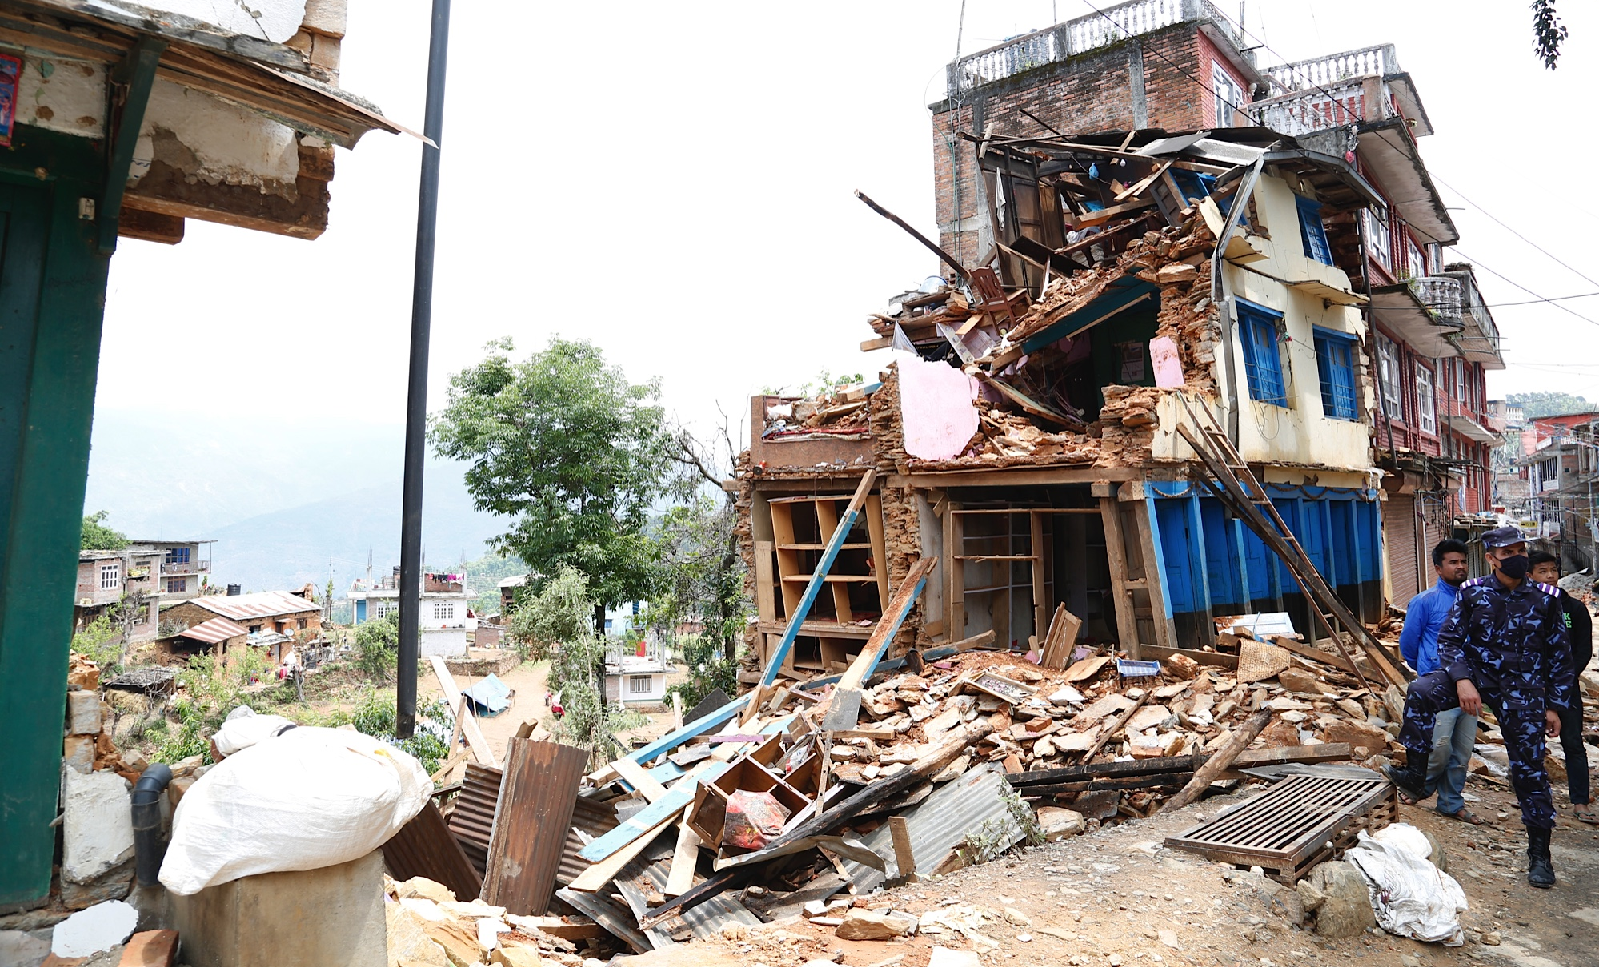 Collapsed buildings in earthquake-hit Chautara, Nepal. Photo credit: DFID@flickr